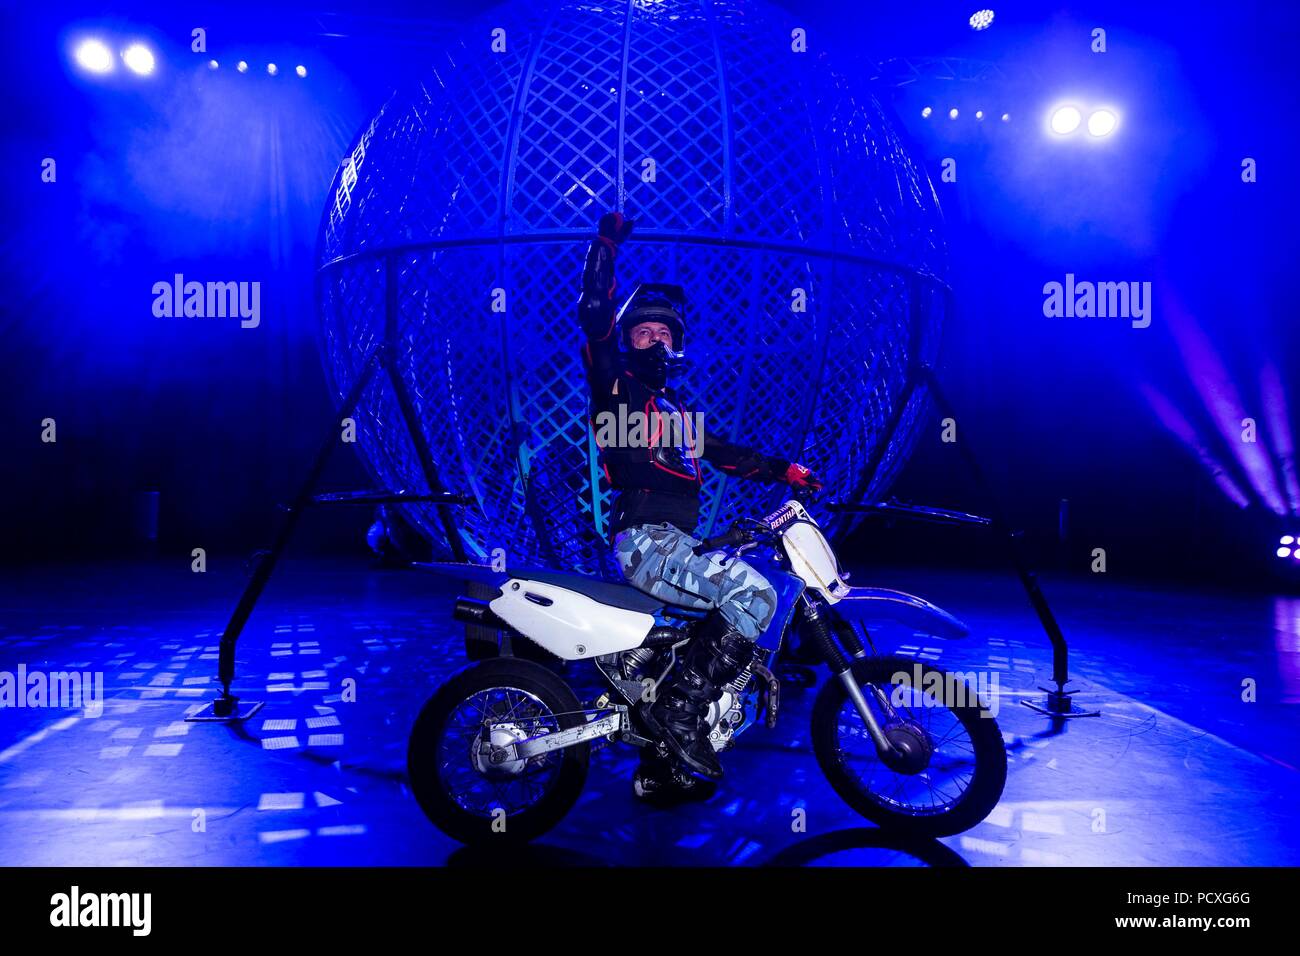 Edinburgh, UK. 4 August 2018. The Pleasance venue at the Edinburgh Fringe Festival holds its showcase of the coming festival with six acts playing at the venue. The event was hosted by comedian Kiri Pritchard McLean  Pictured: Extract from Cirque Berserk Credit: Rich Dyson/Alamy Live News Stock Photo